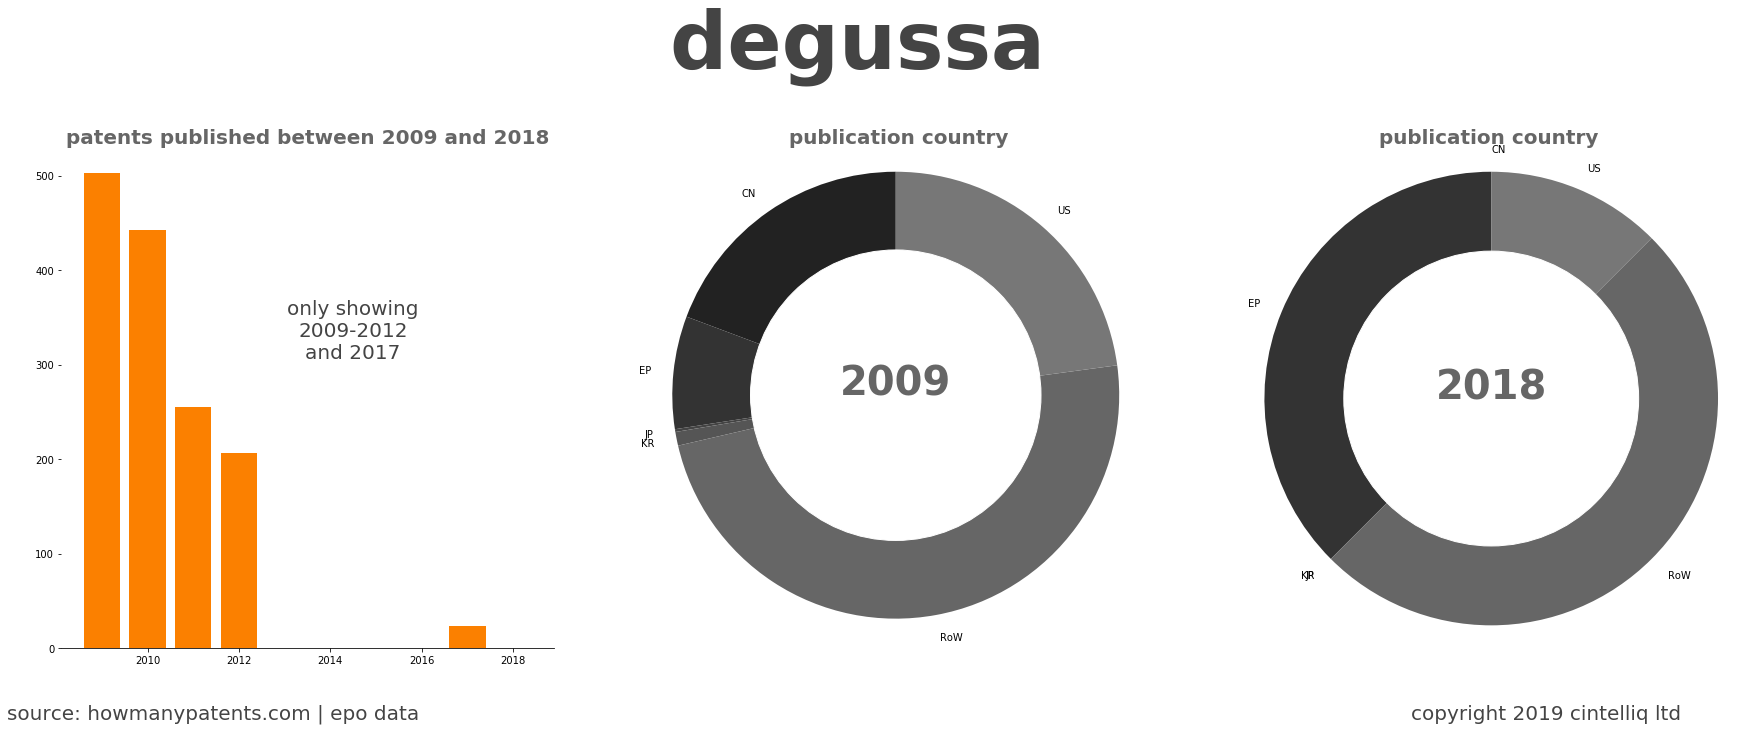 summary of patents for Degussa 